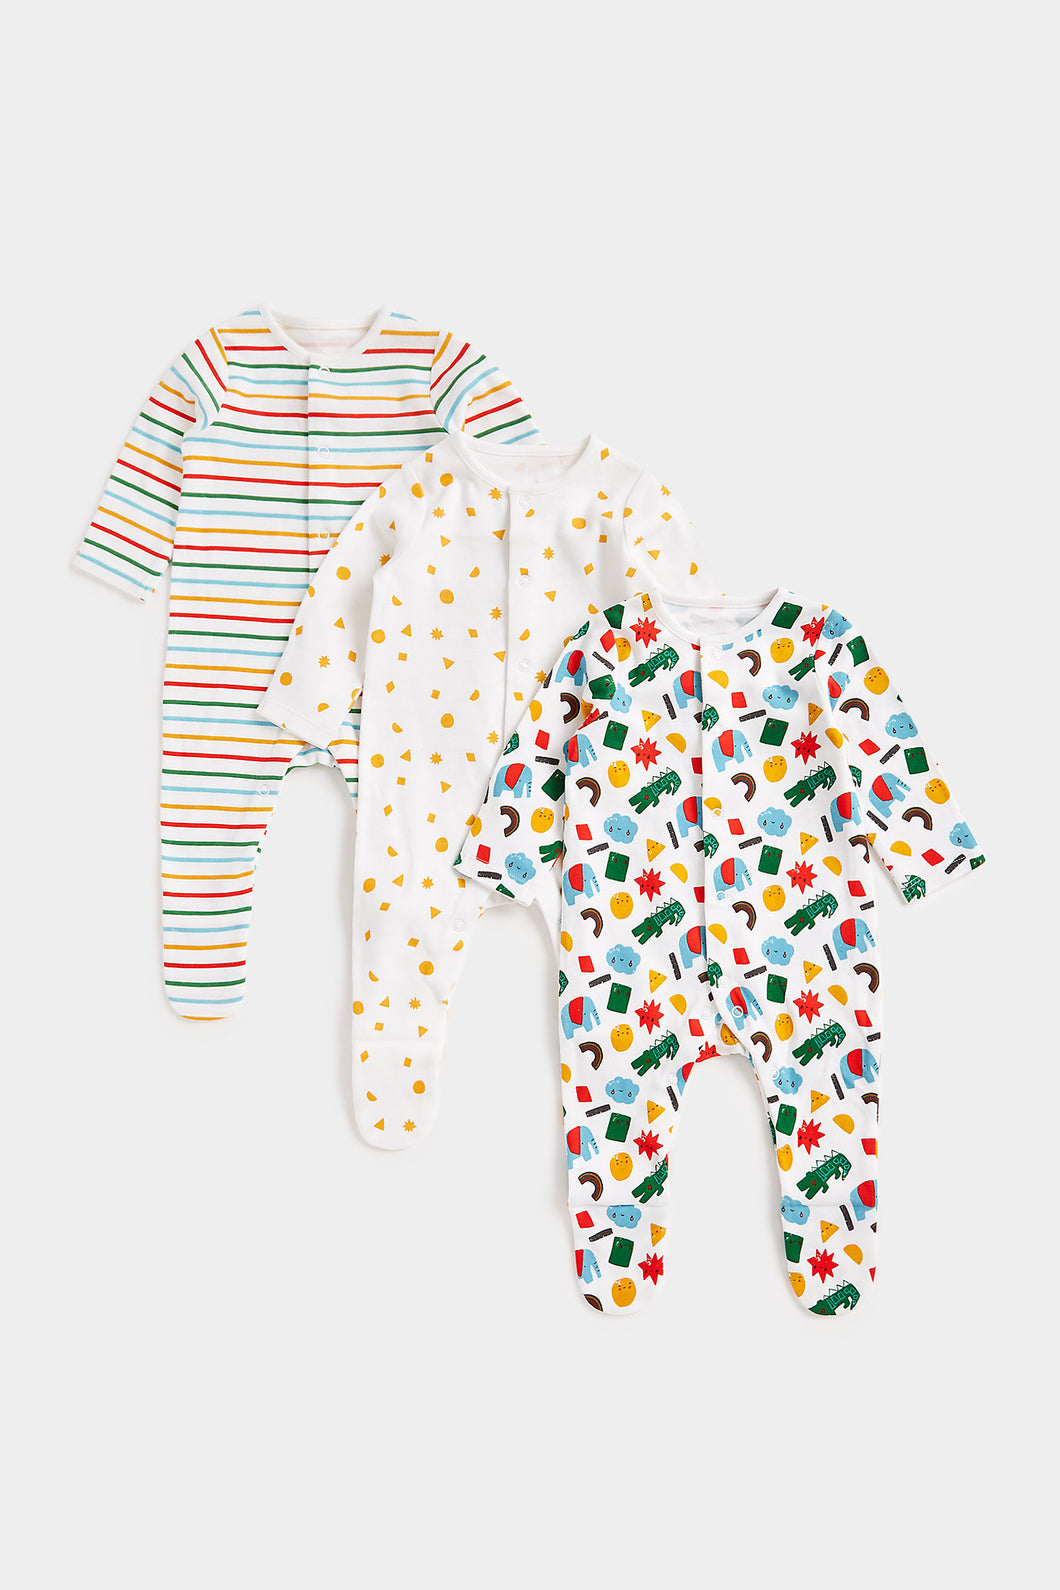 Mothercare Bright Sleepsuits - 3 Pack